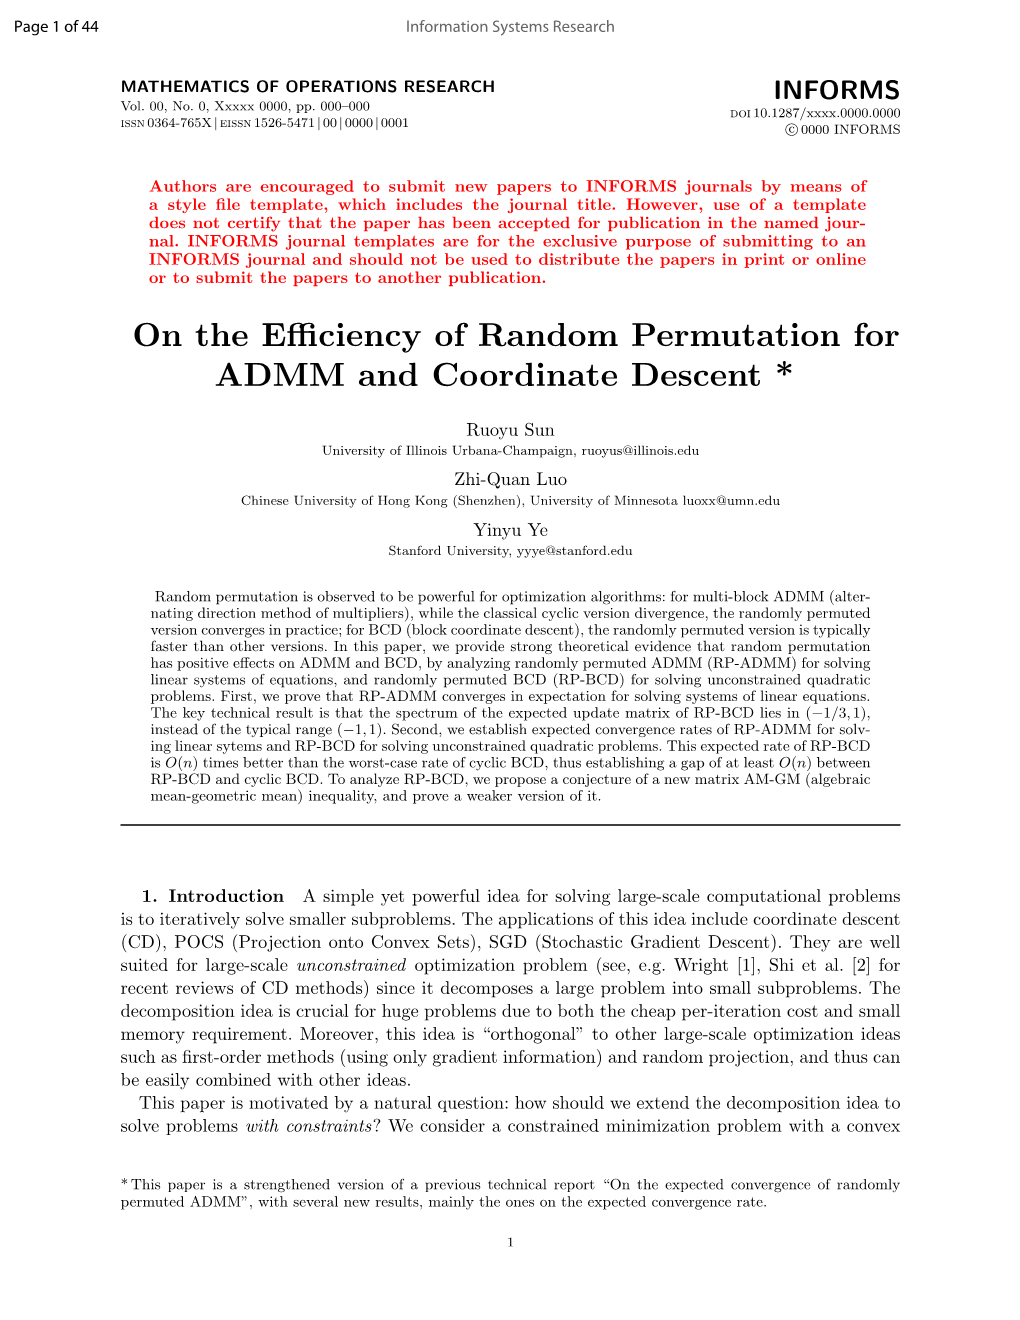 On the Efficiency of Random Permutation for ADMM And